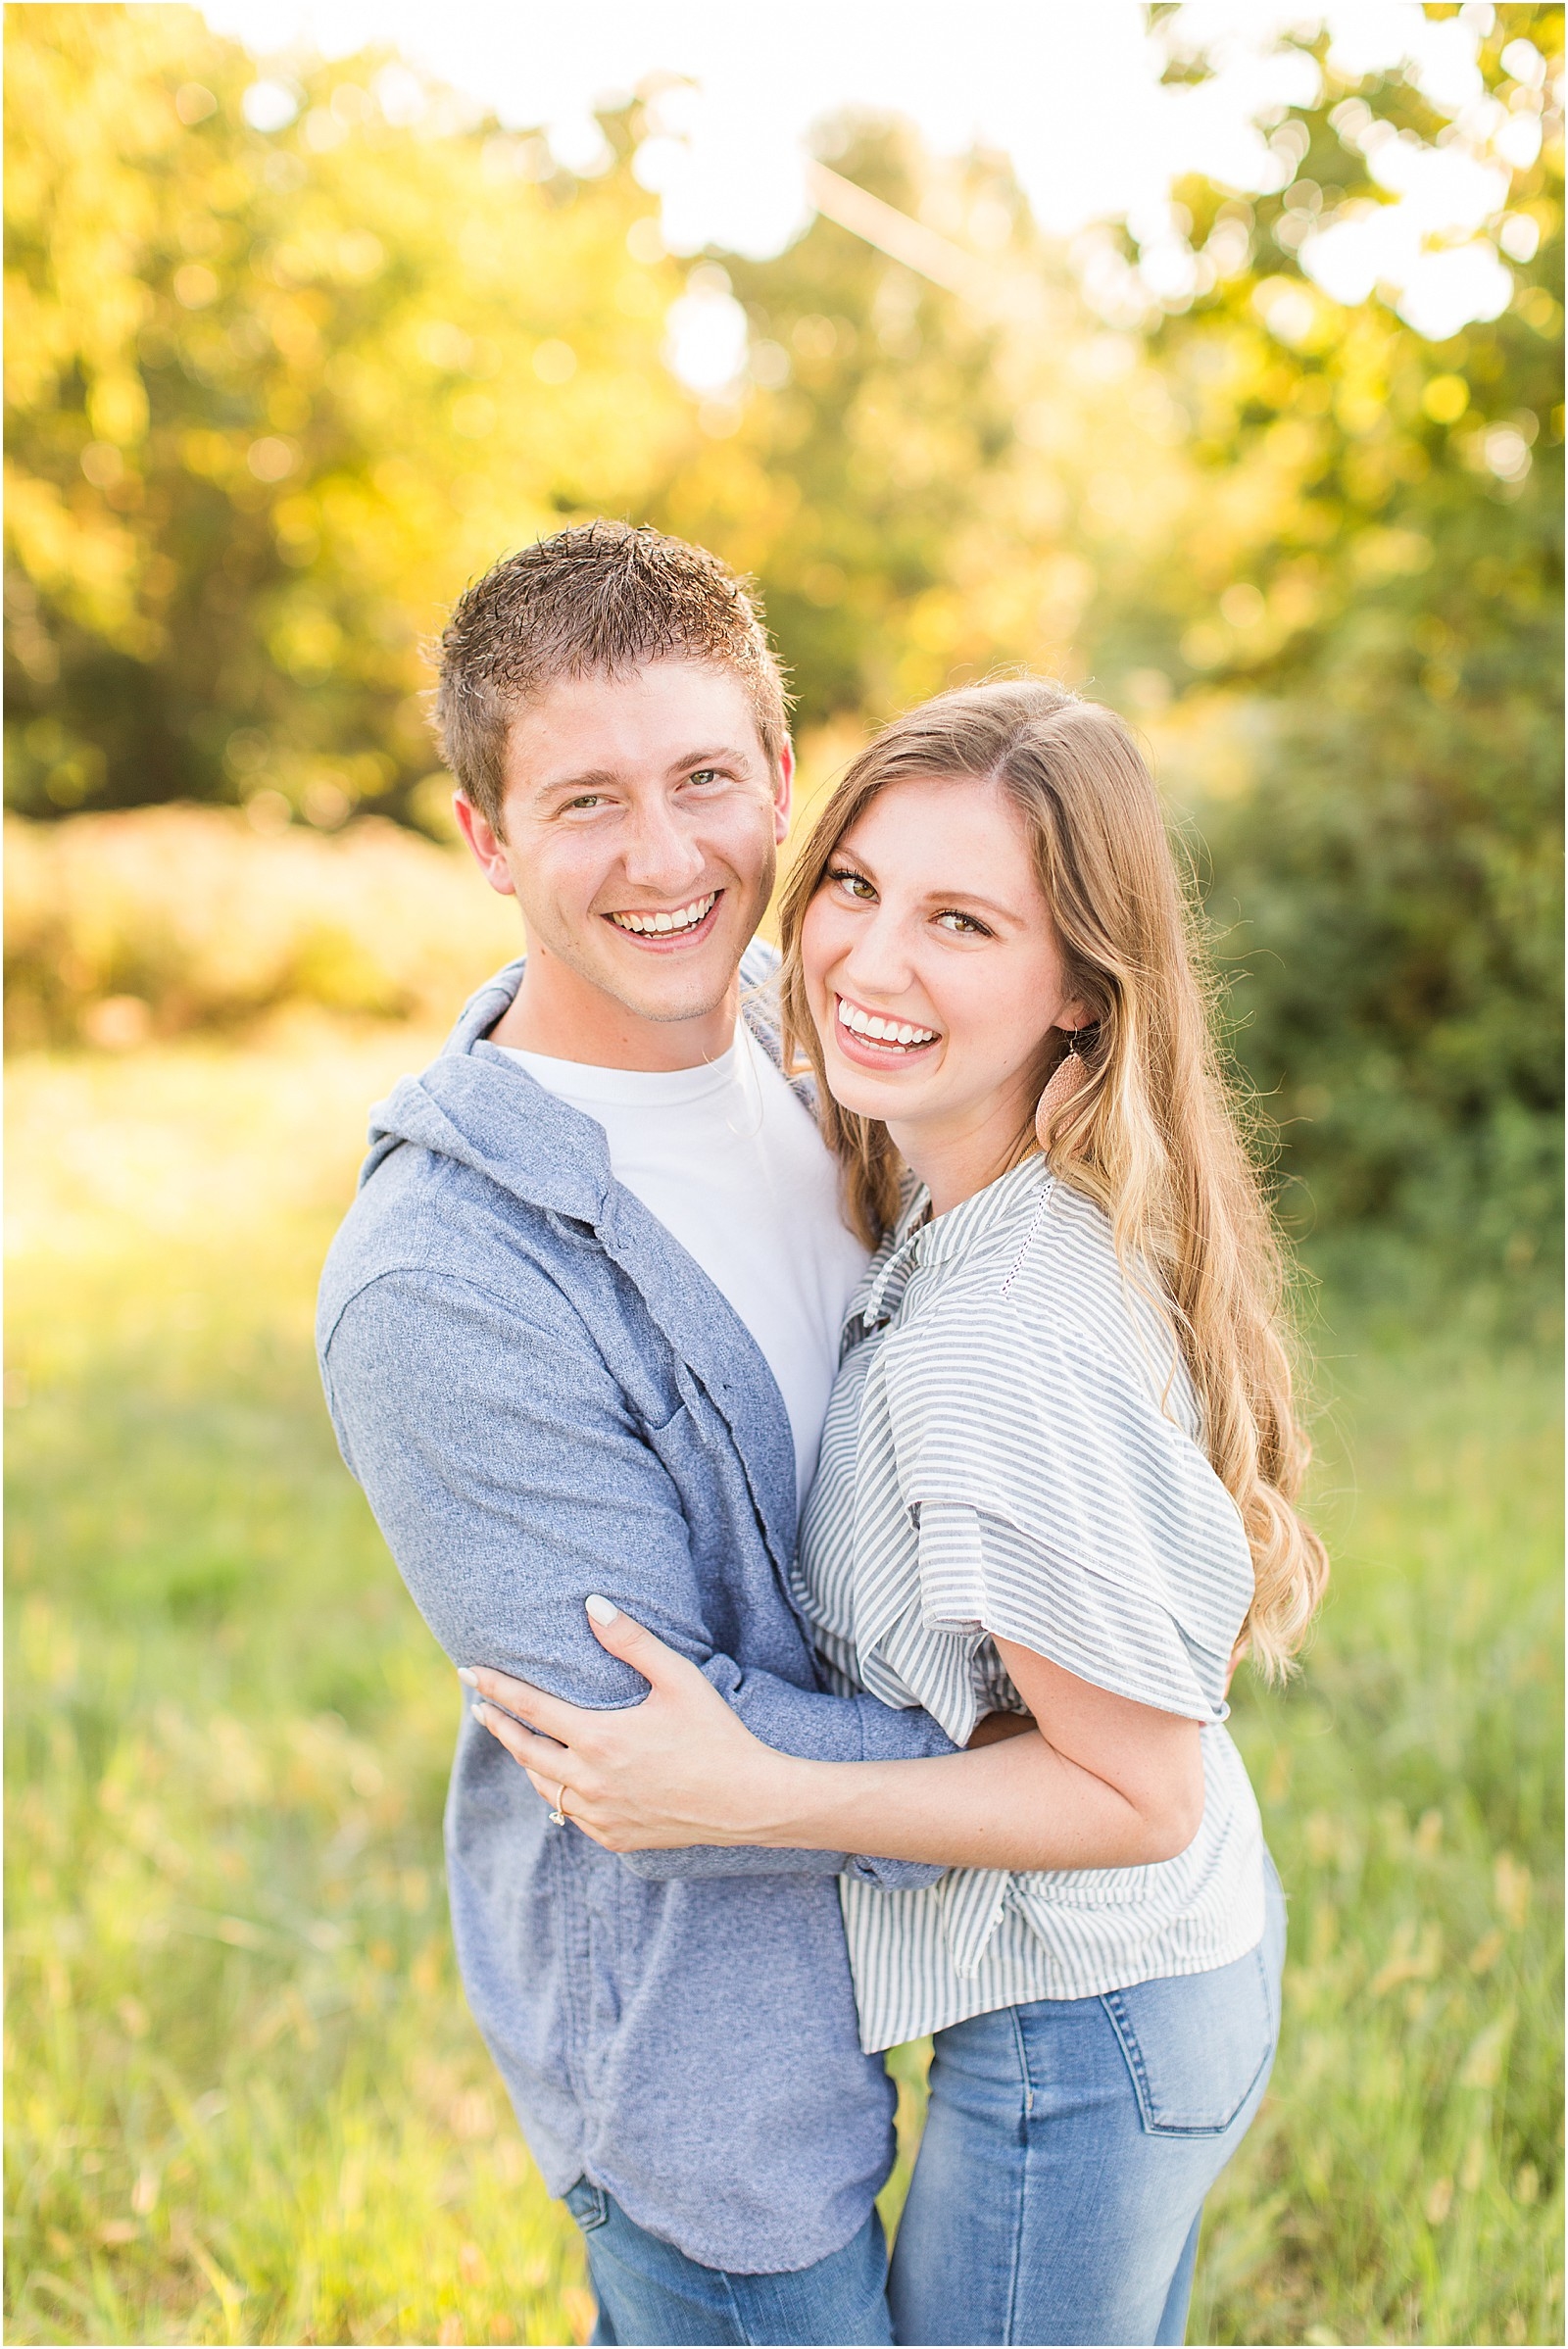 A Jasper Indiana Engagement Session | Tori and Kyle | Bret and Brandie Photography001.jpg